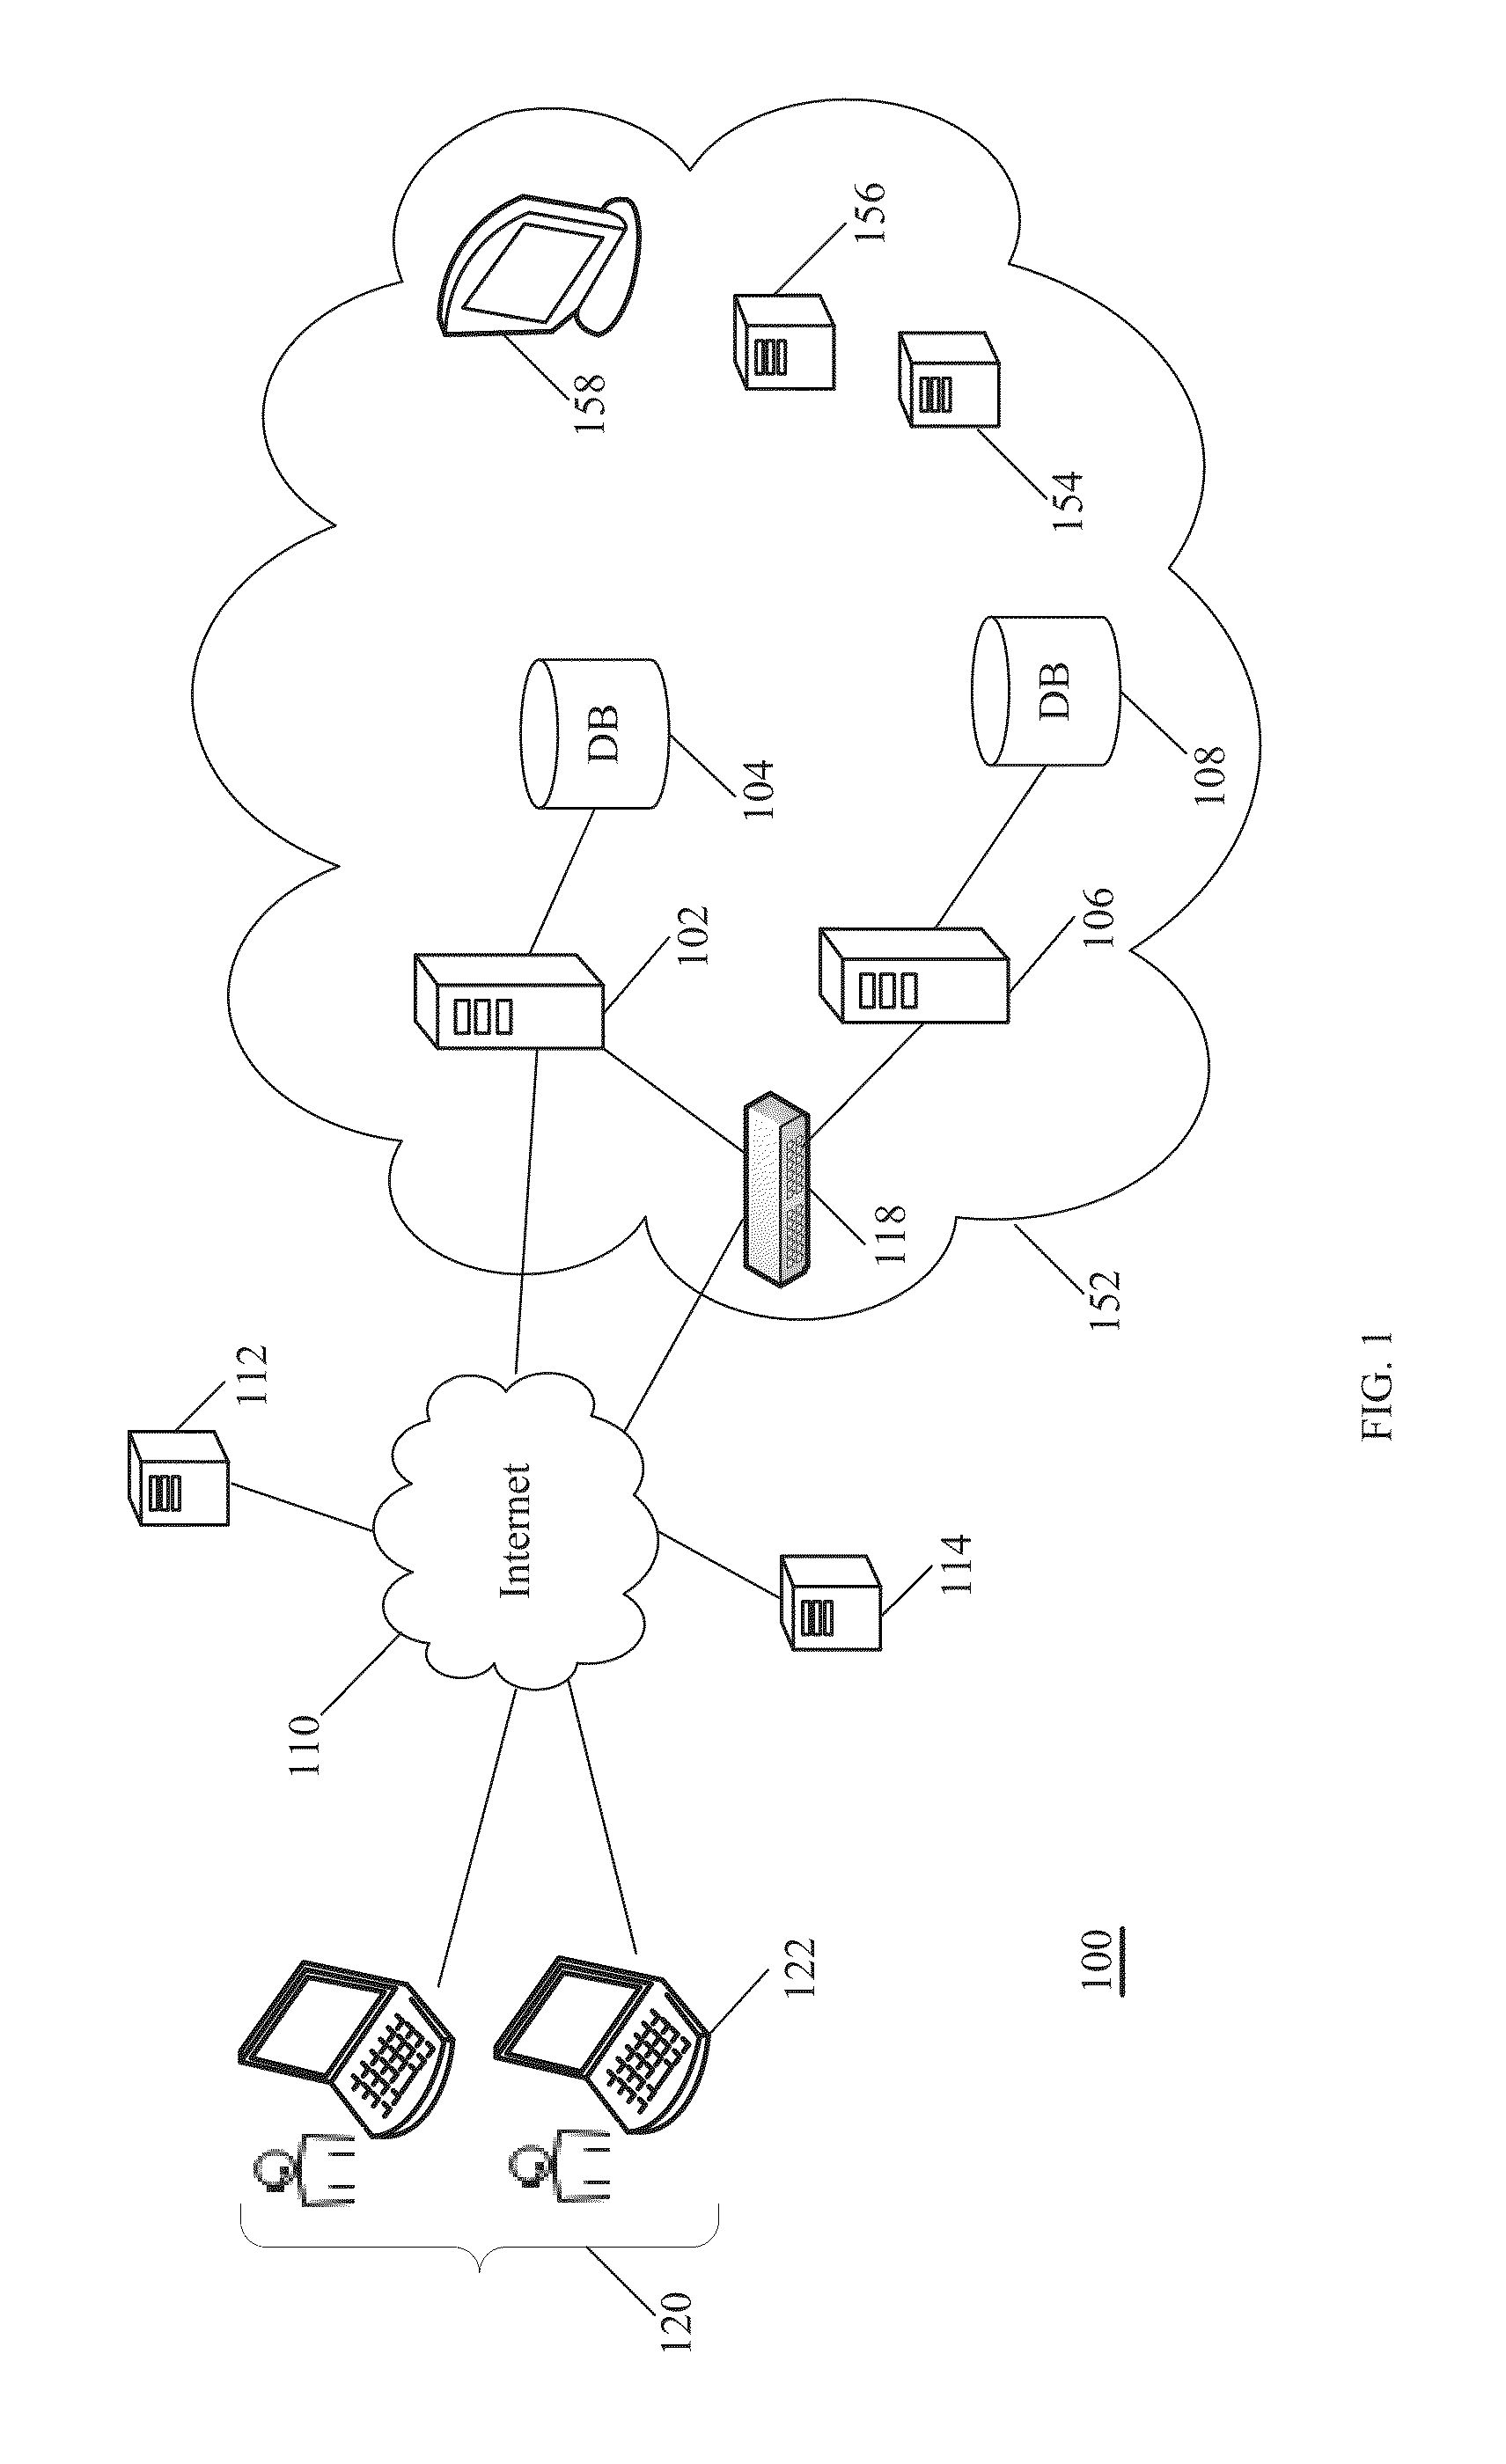 System, method and apparatus for performing facial recognition